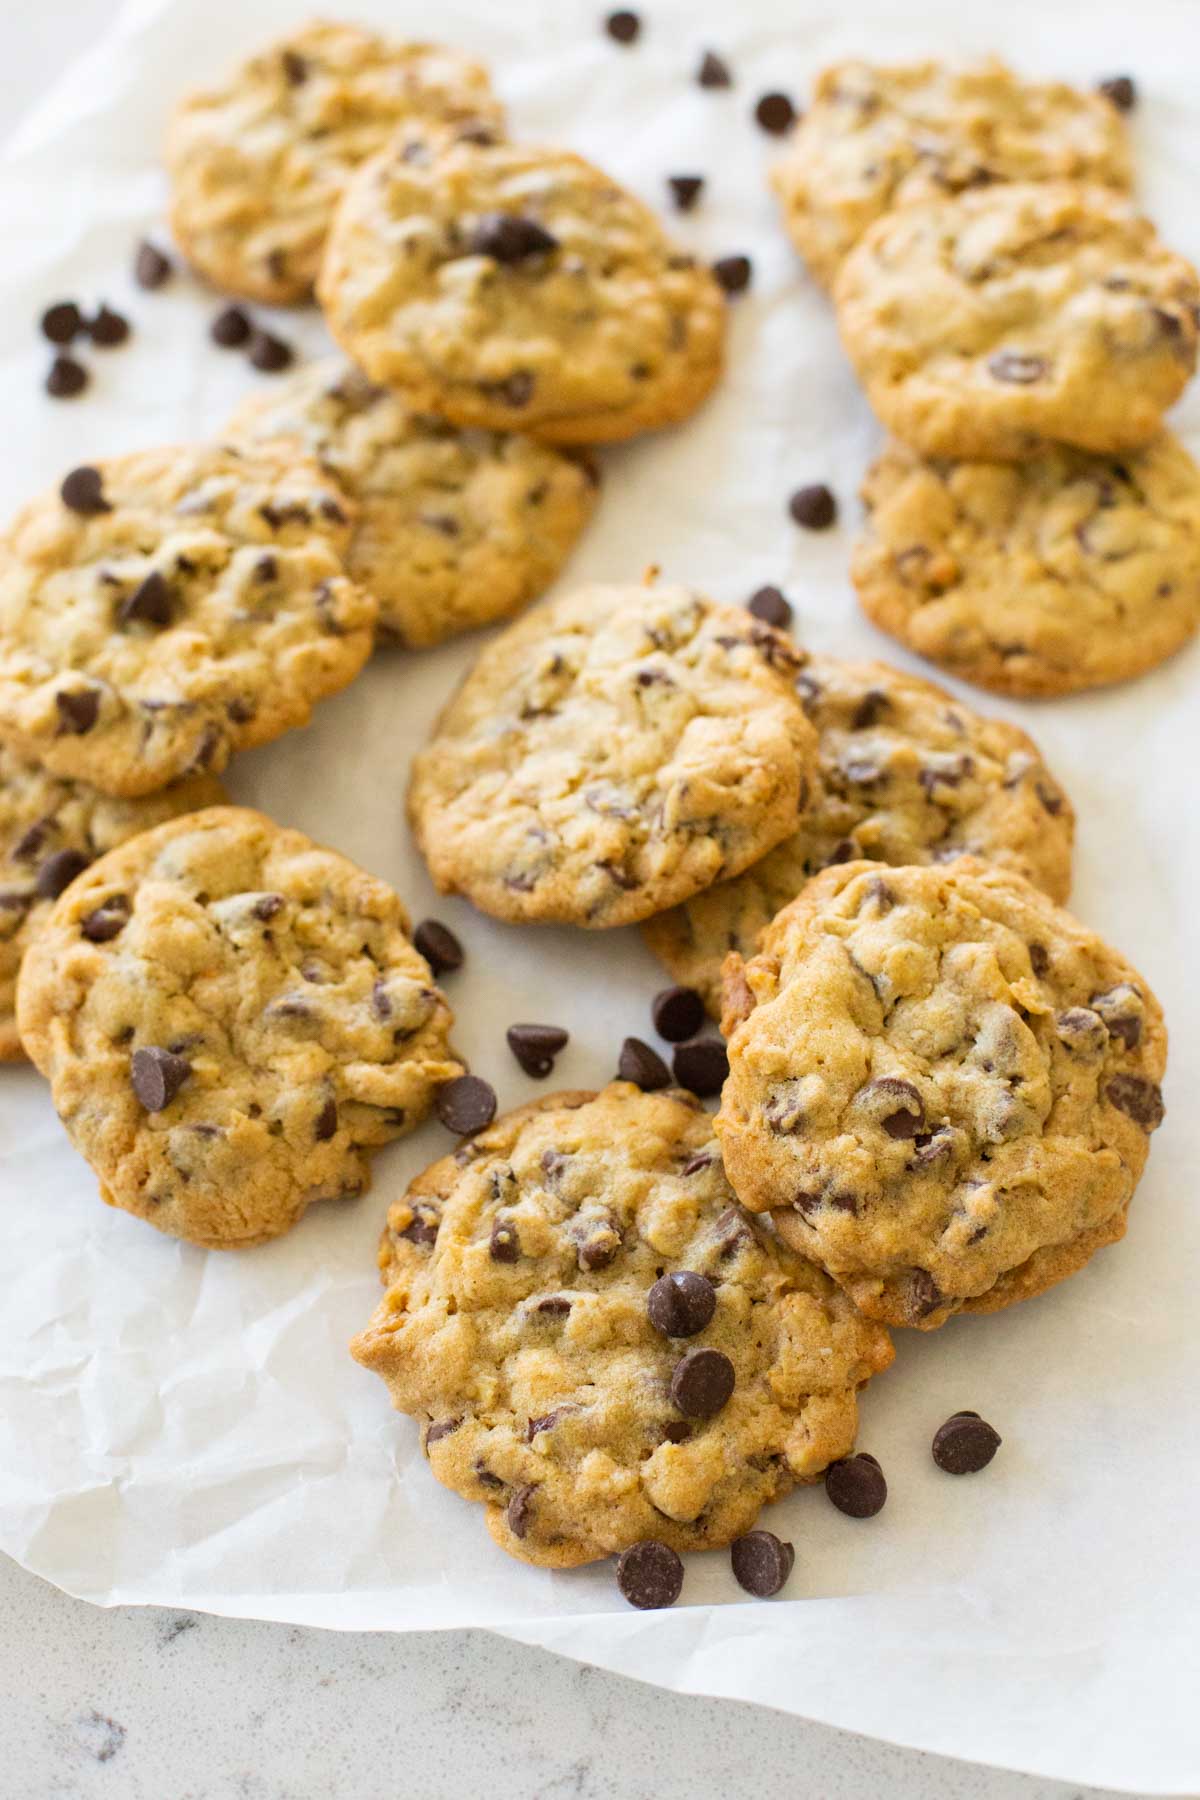 The platter of chocolate chip cookies with chocolate chips scattered about.